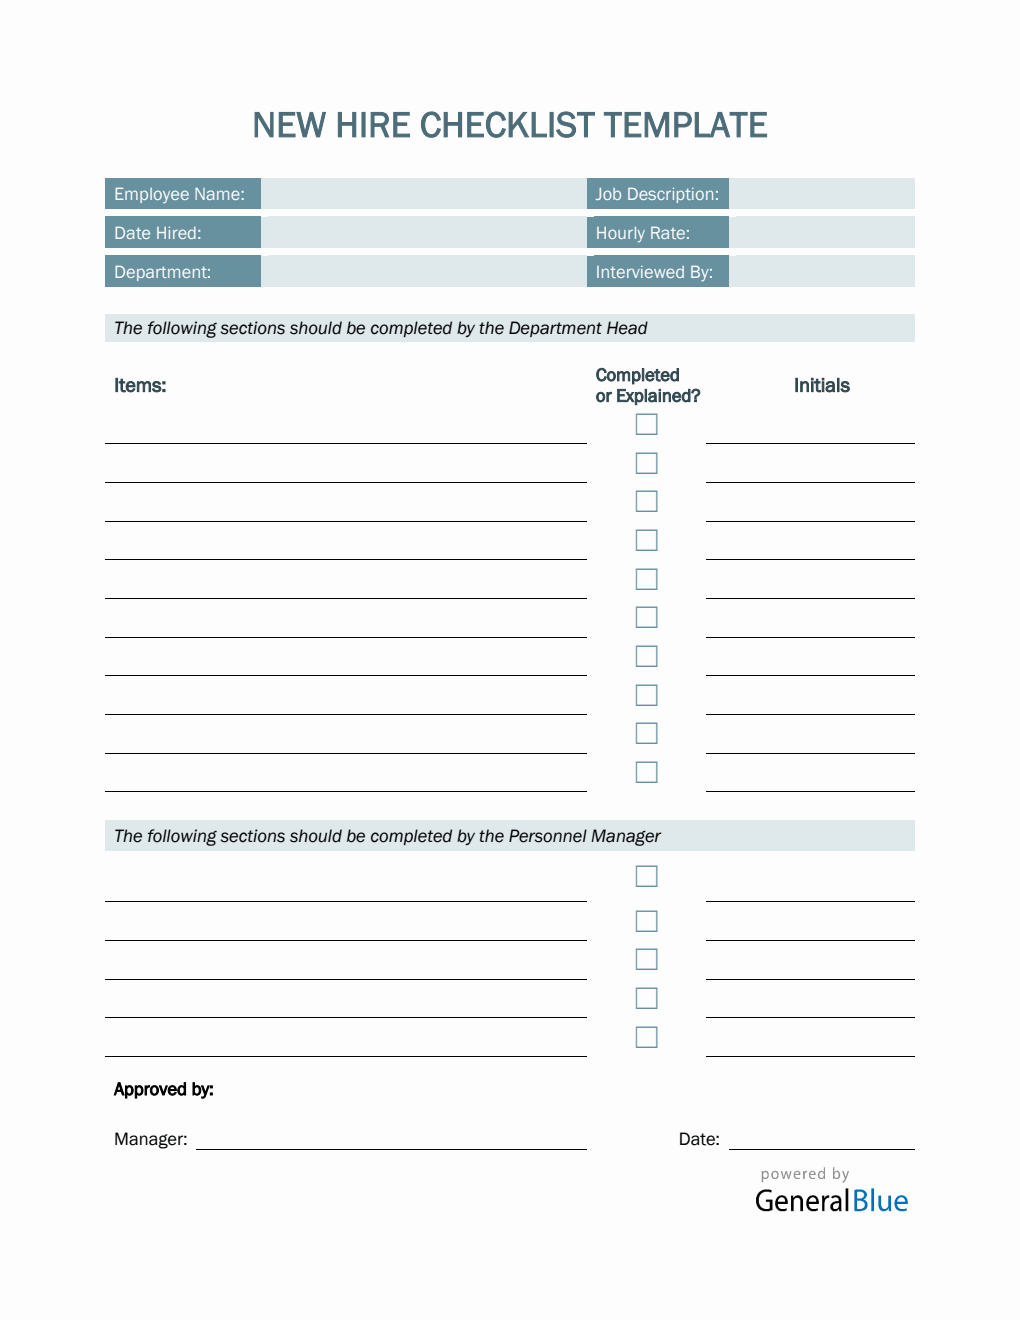 New Hire Checklist Template in Word